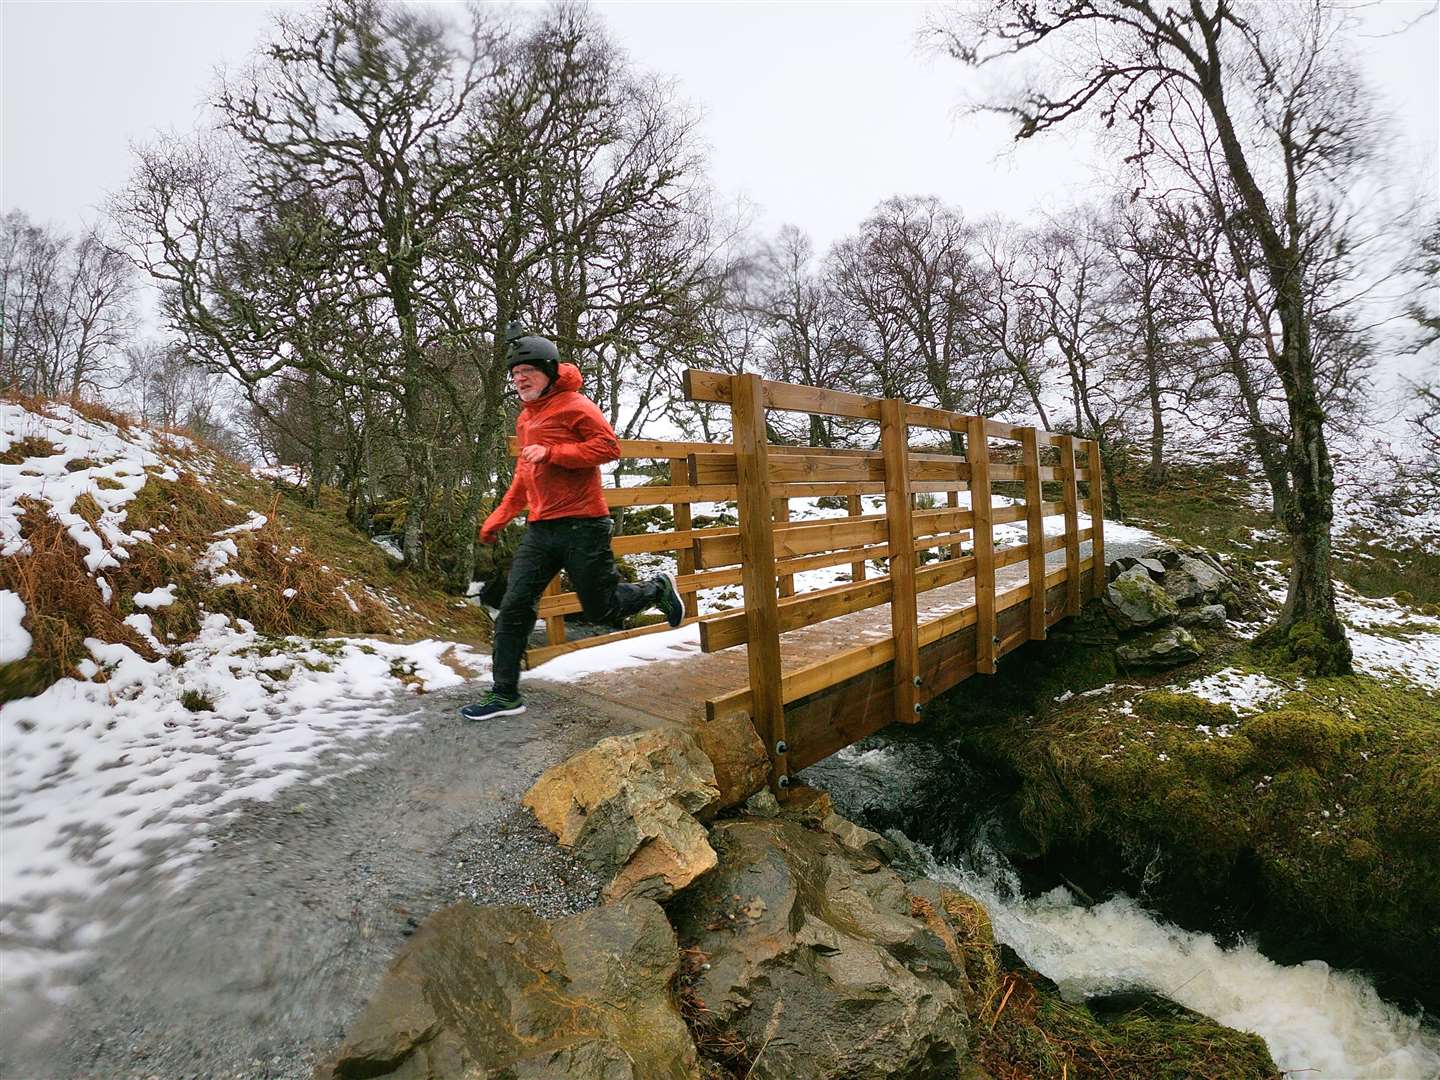 Crossing a bridge on the way down the South Loch Ness Trail towards Fort Augustus - runner is Graeme Ambrose.